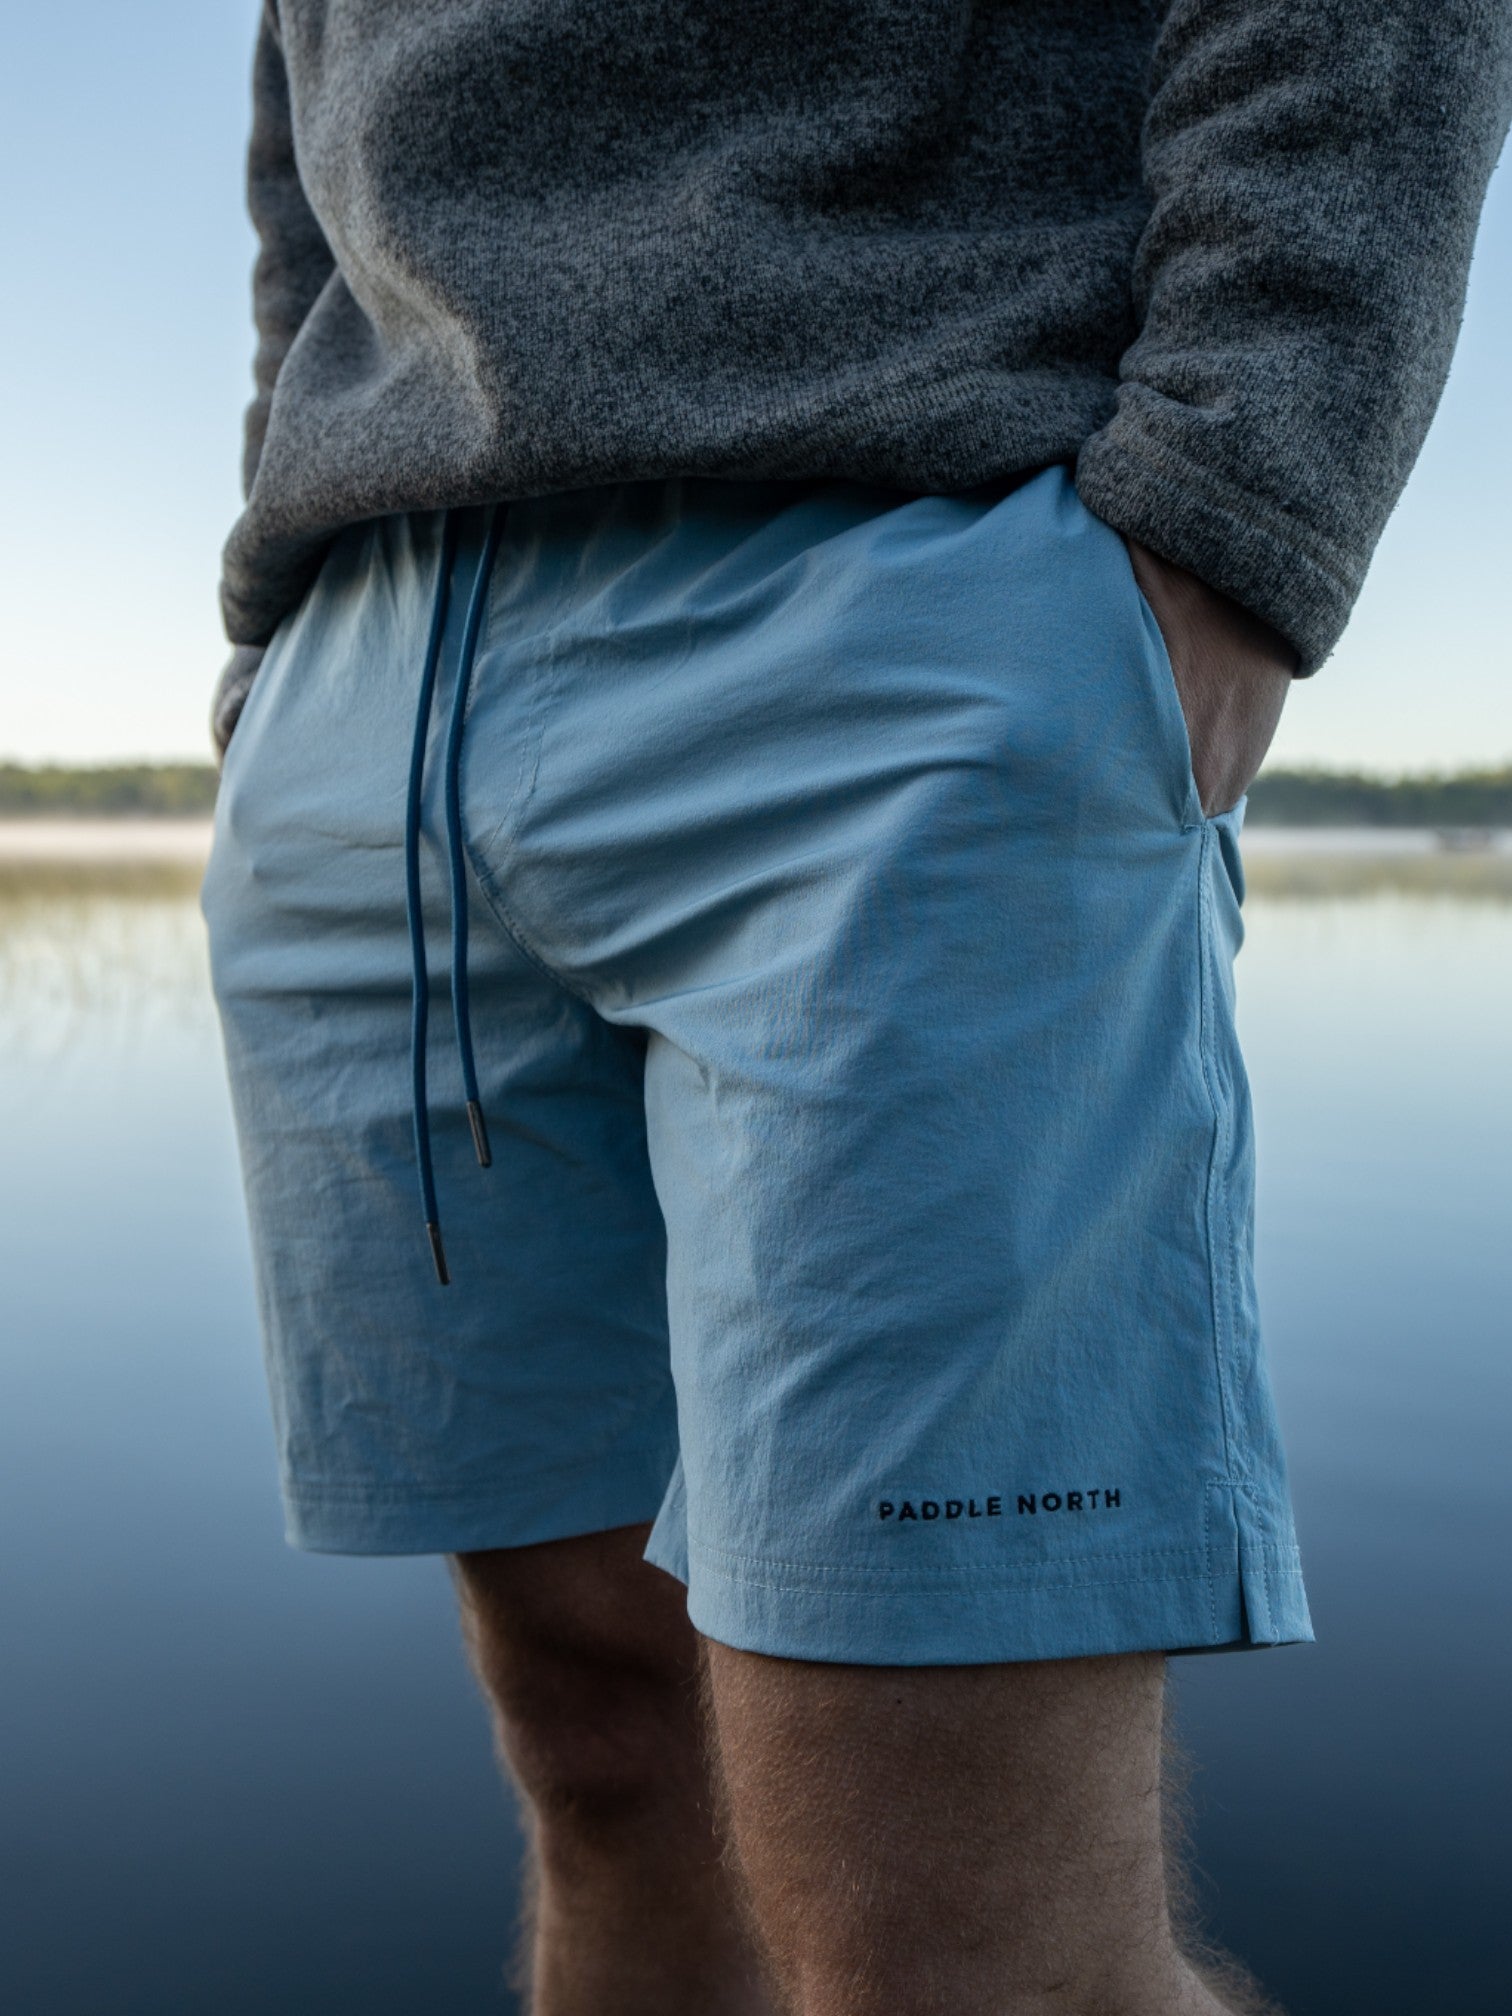 Man wearing blue shorts outside with blue water behind him.